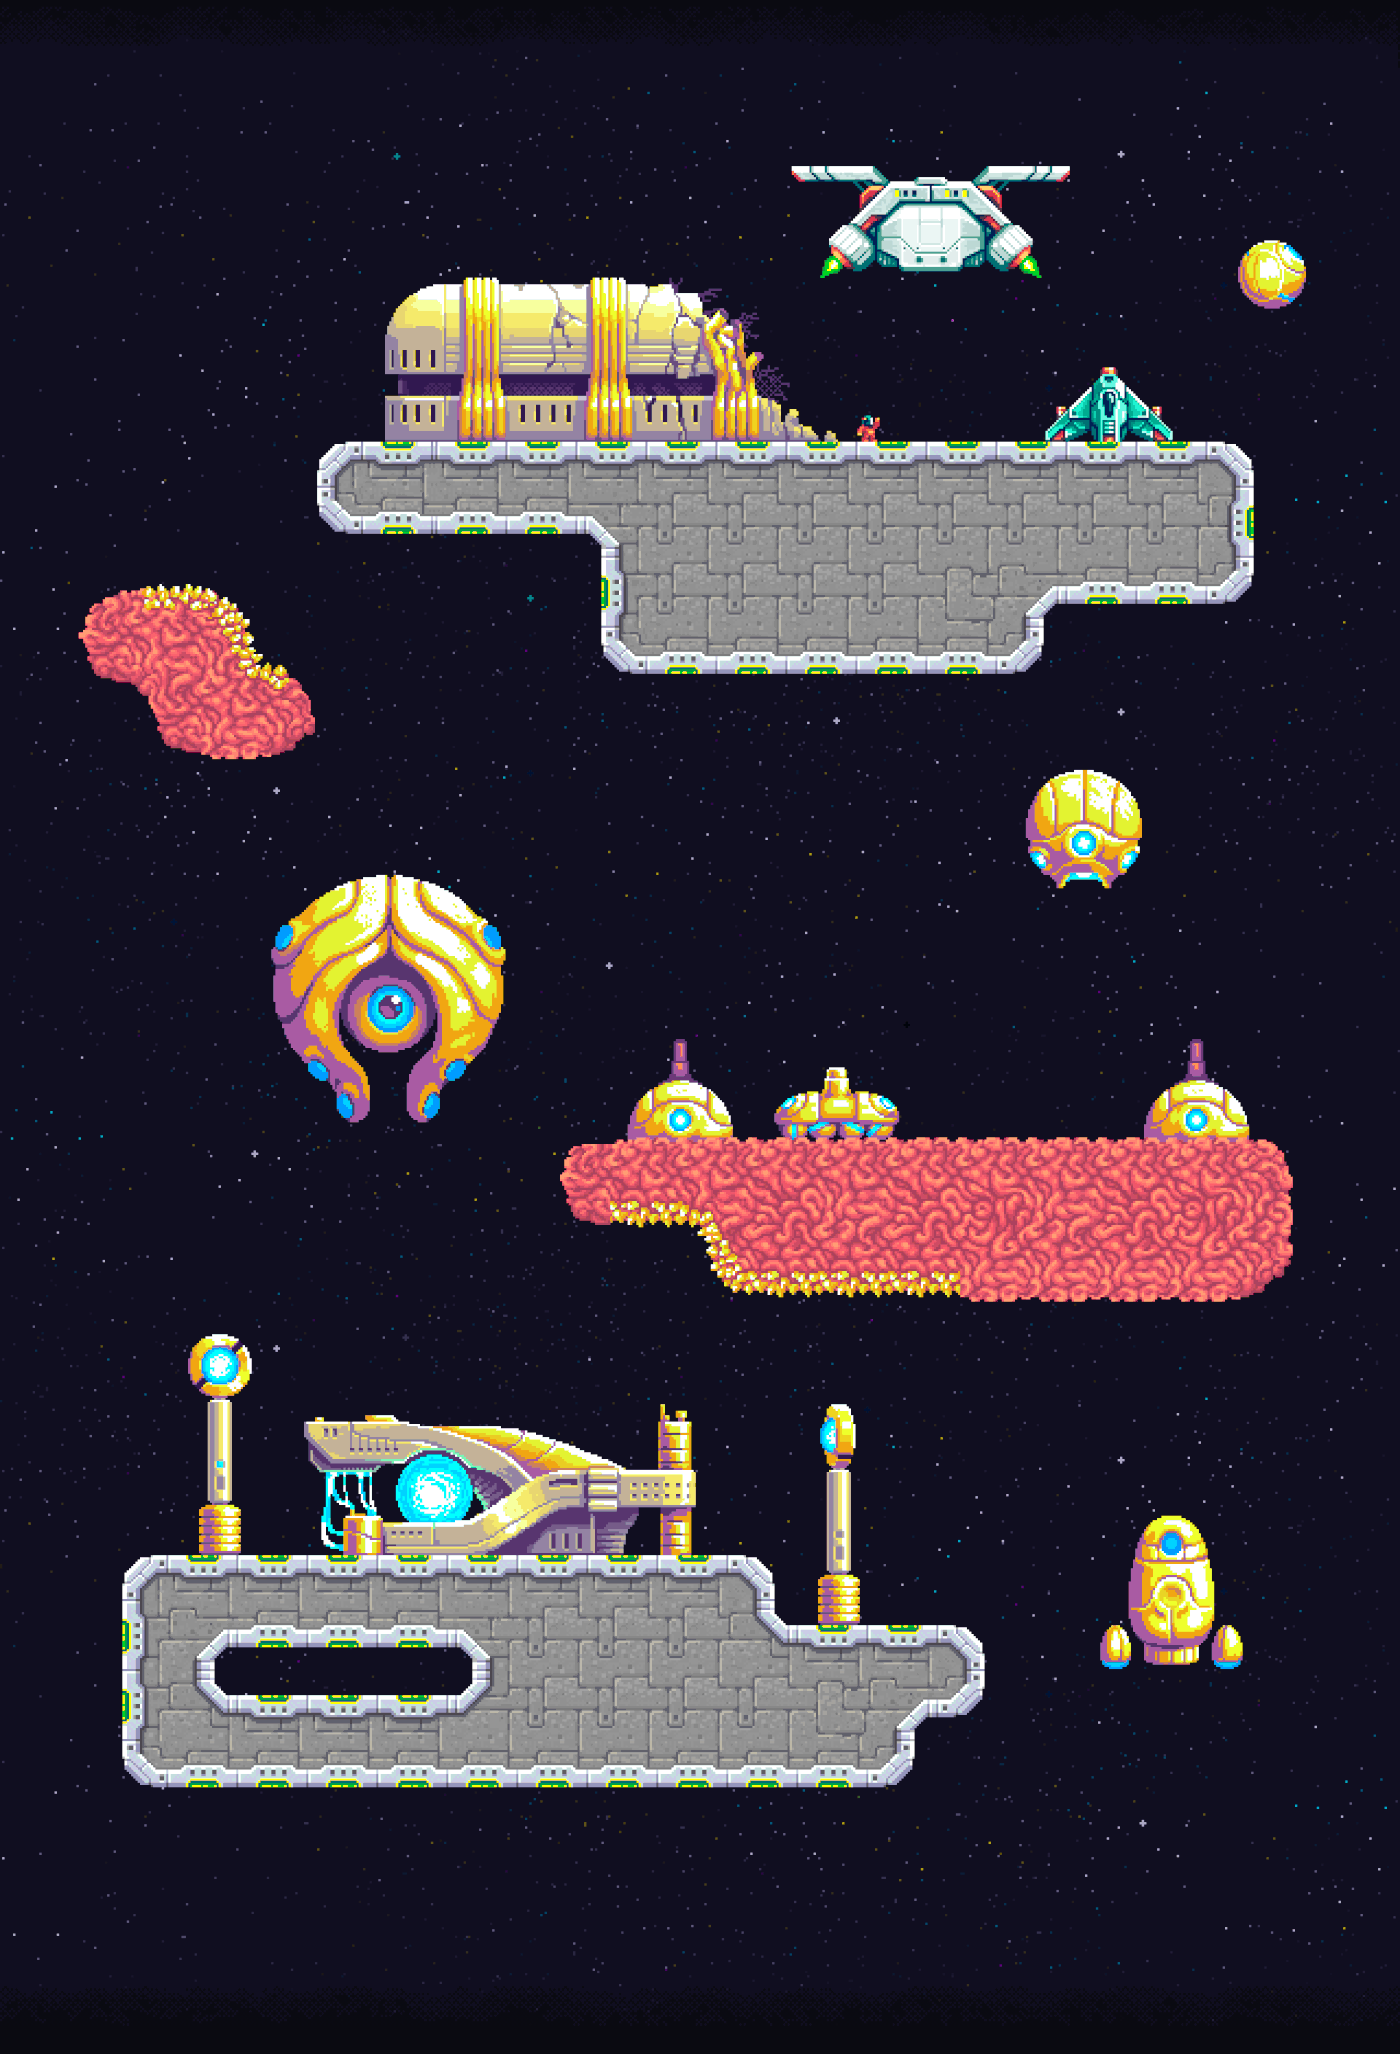 Spacesheep, tiles and enemy drones for a retro style 8bit game